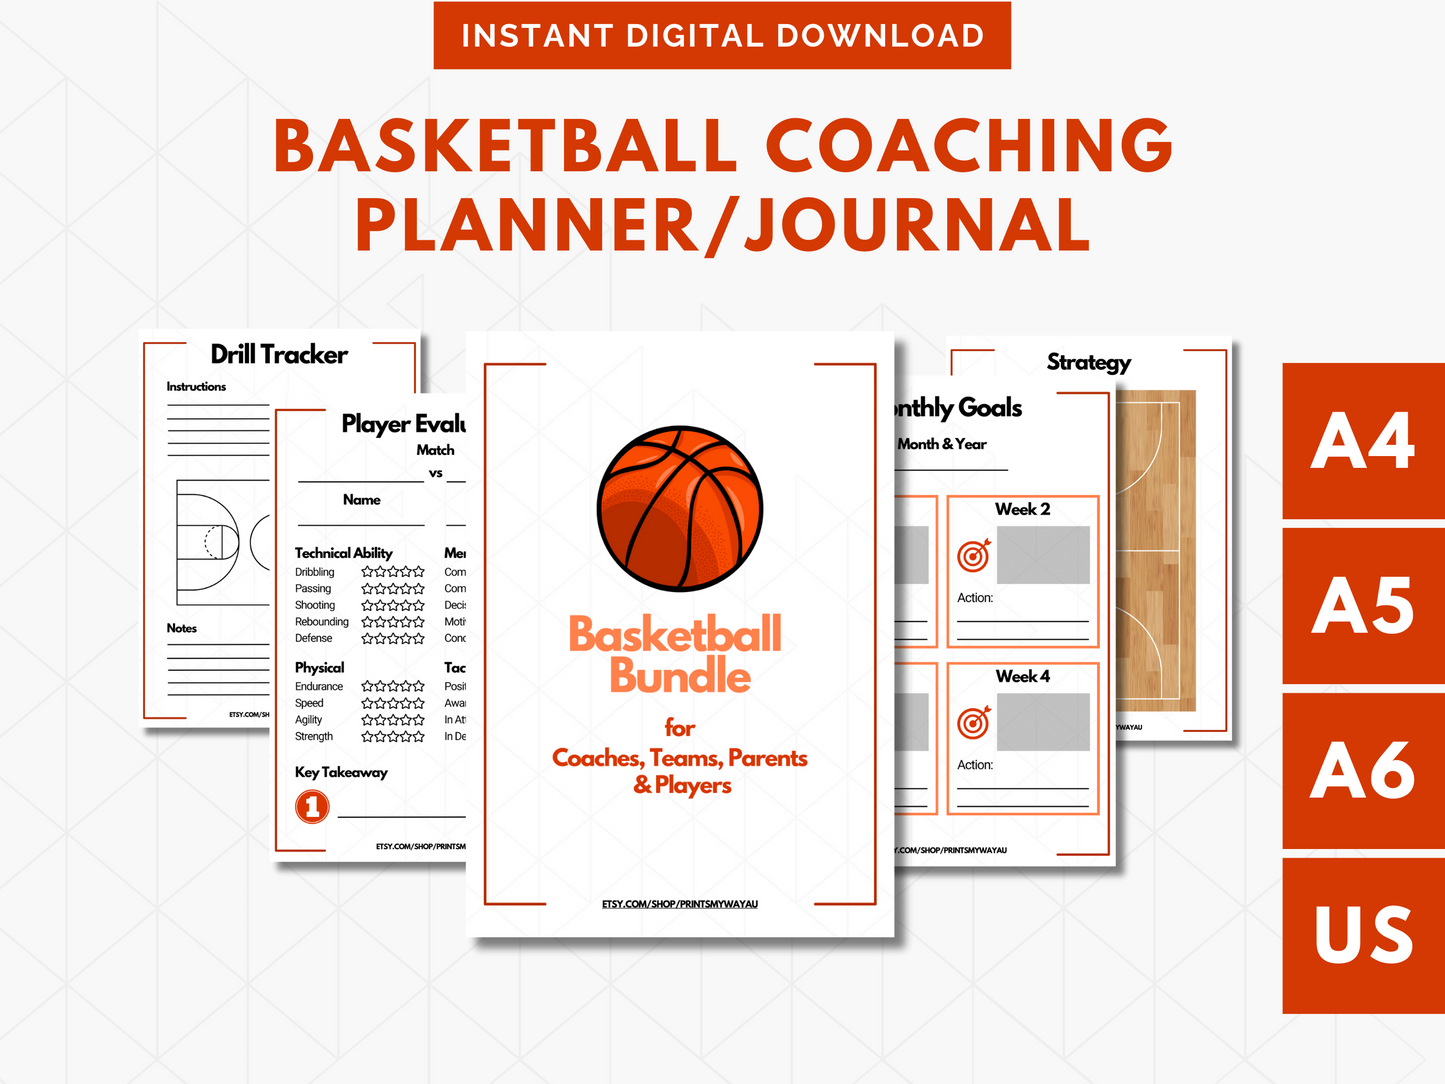 Basketball Coaching Sheets | Printable Basketball Planner for Players, Coaches, Teams & Parents